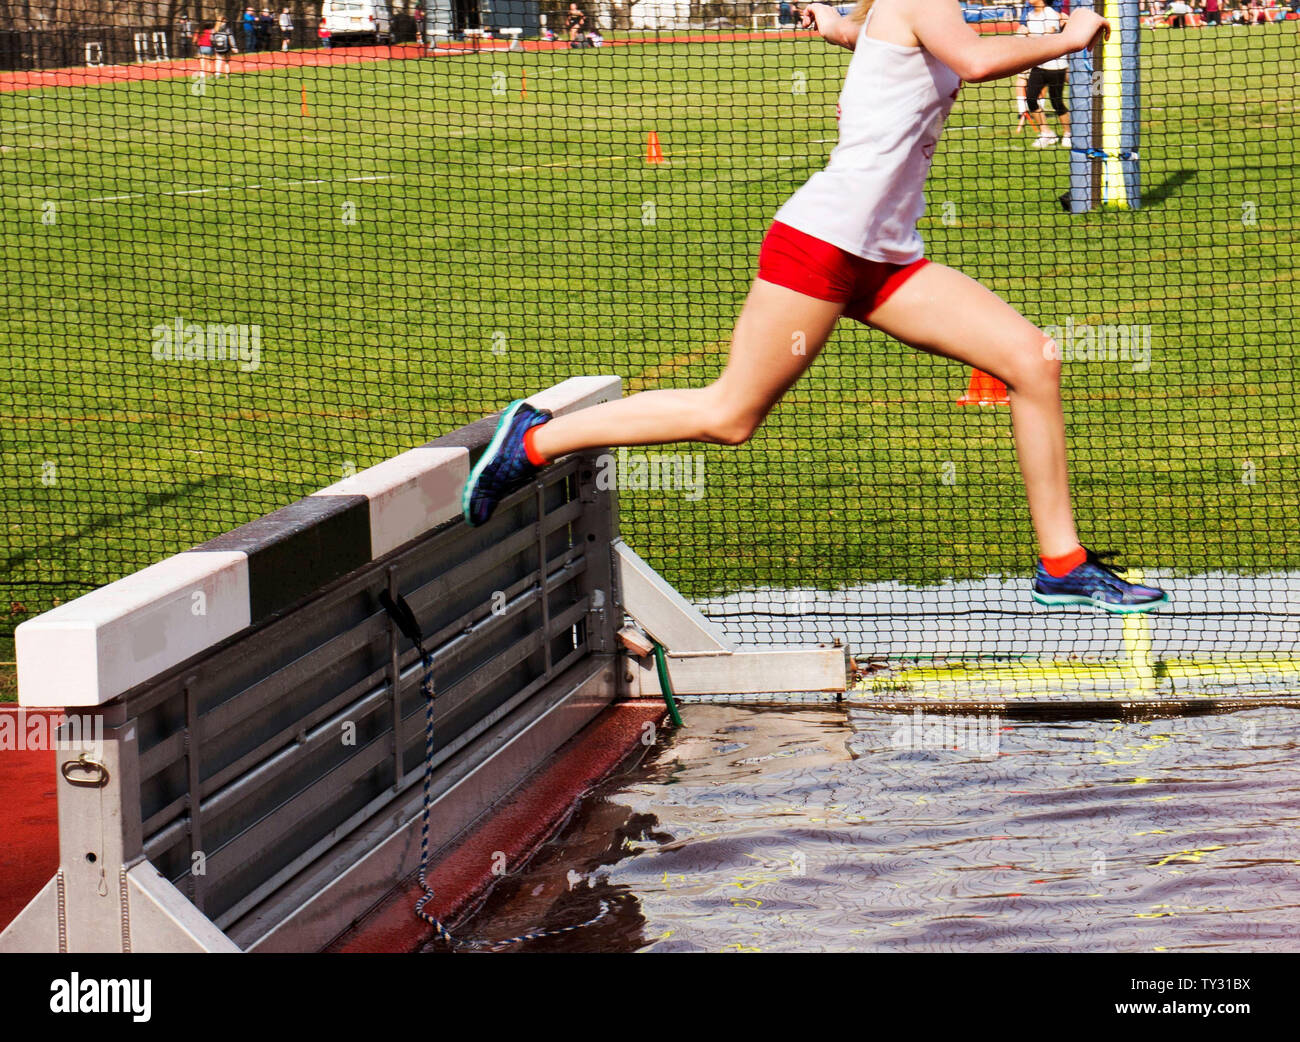 A female runner going over the water jump in a steeplechase race Stock Photo